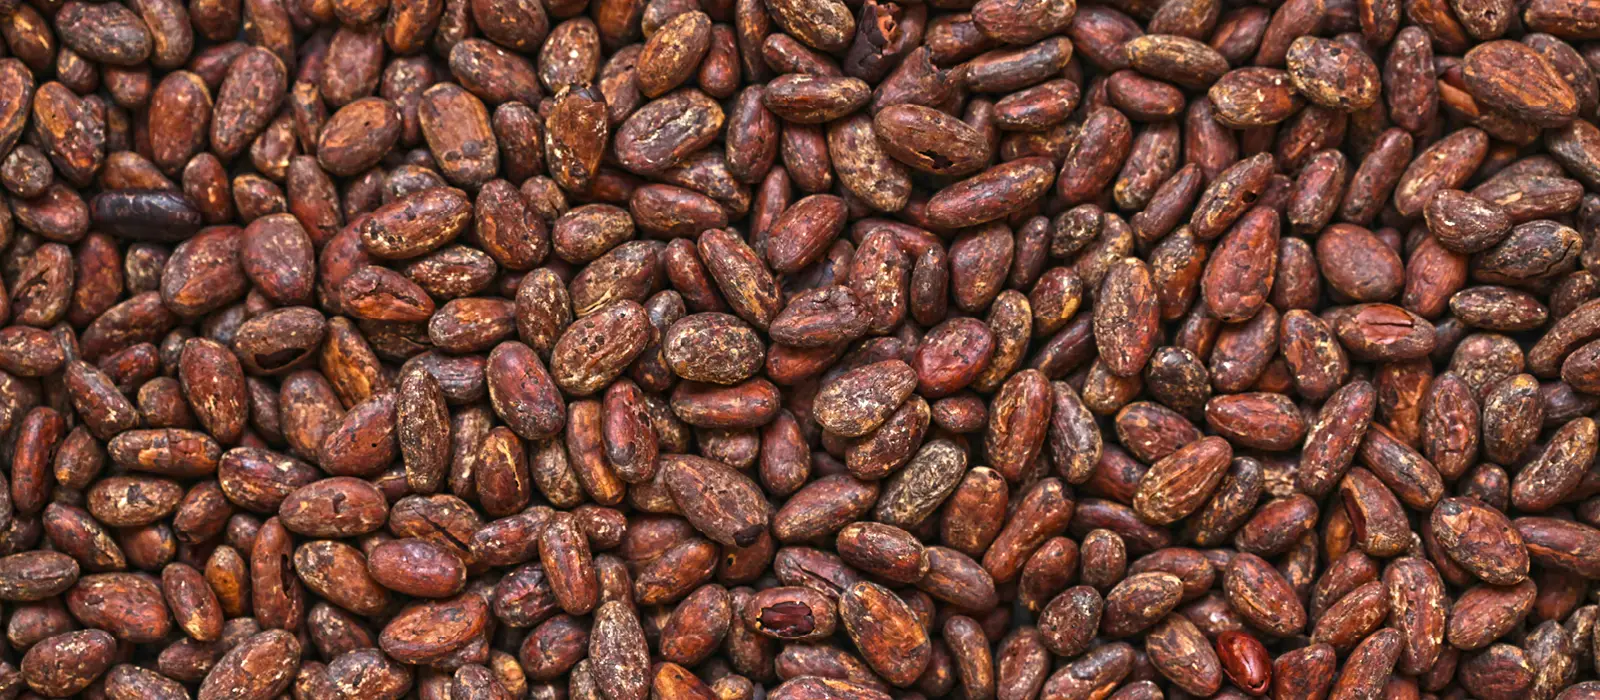 A pile of cocoa beans